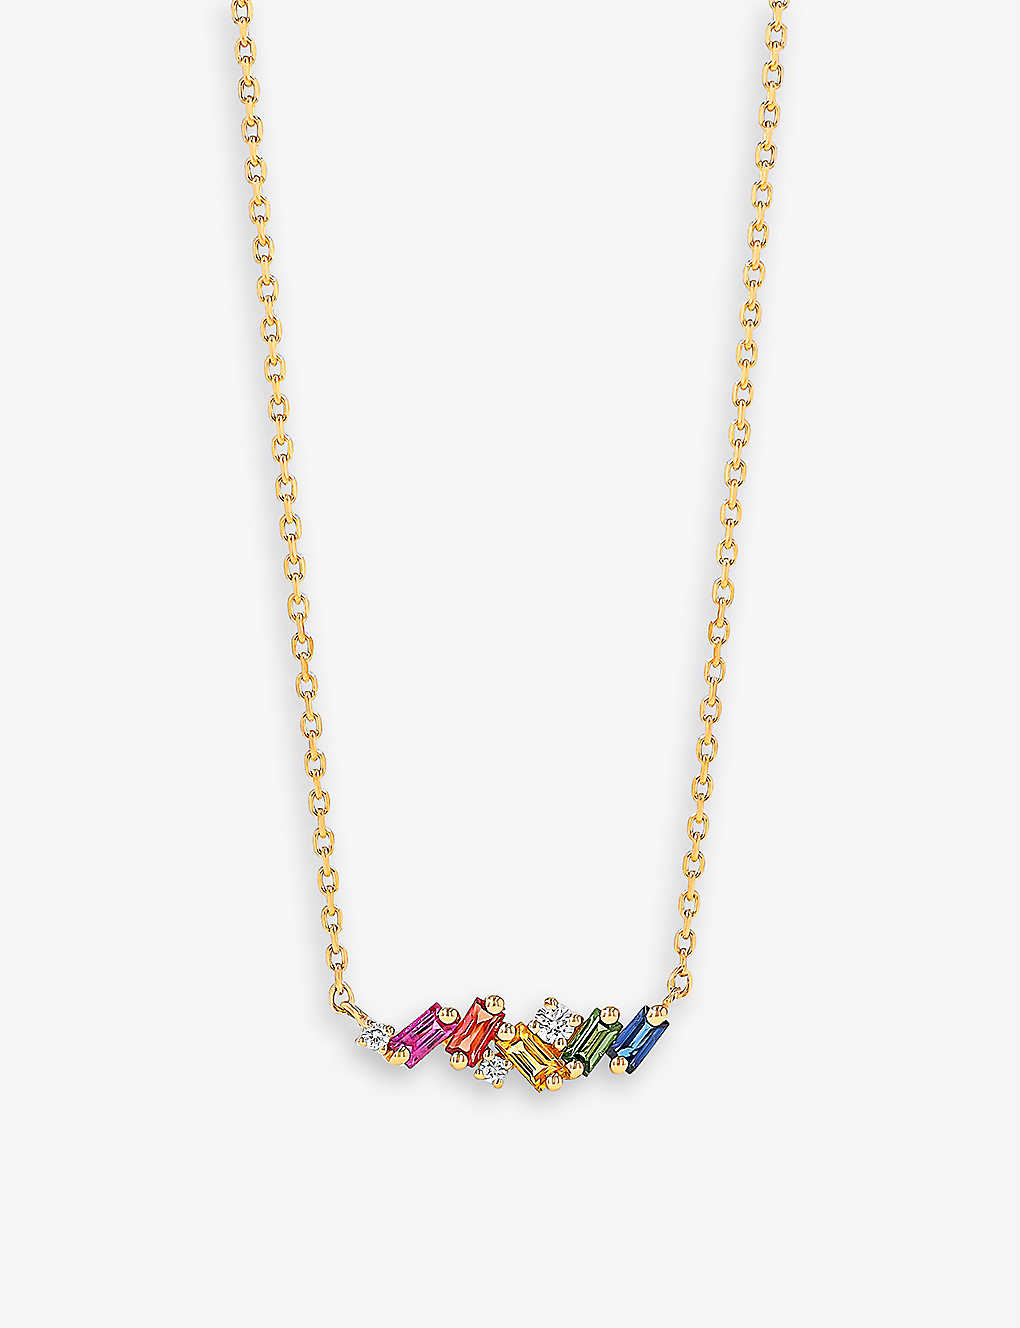 SUZANNE KALAN FRENZY 18CT YELLOW-GOLD, 0.05 DIAMOND AND 0.35CT RAINBOW SAPPHIRE BAR NECKLACE,61894786